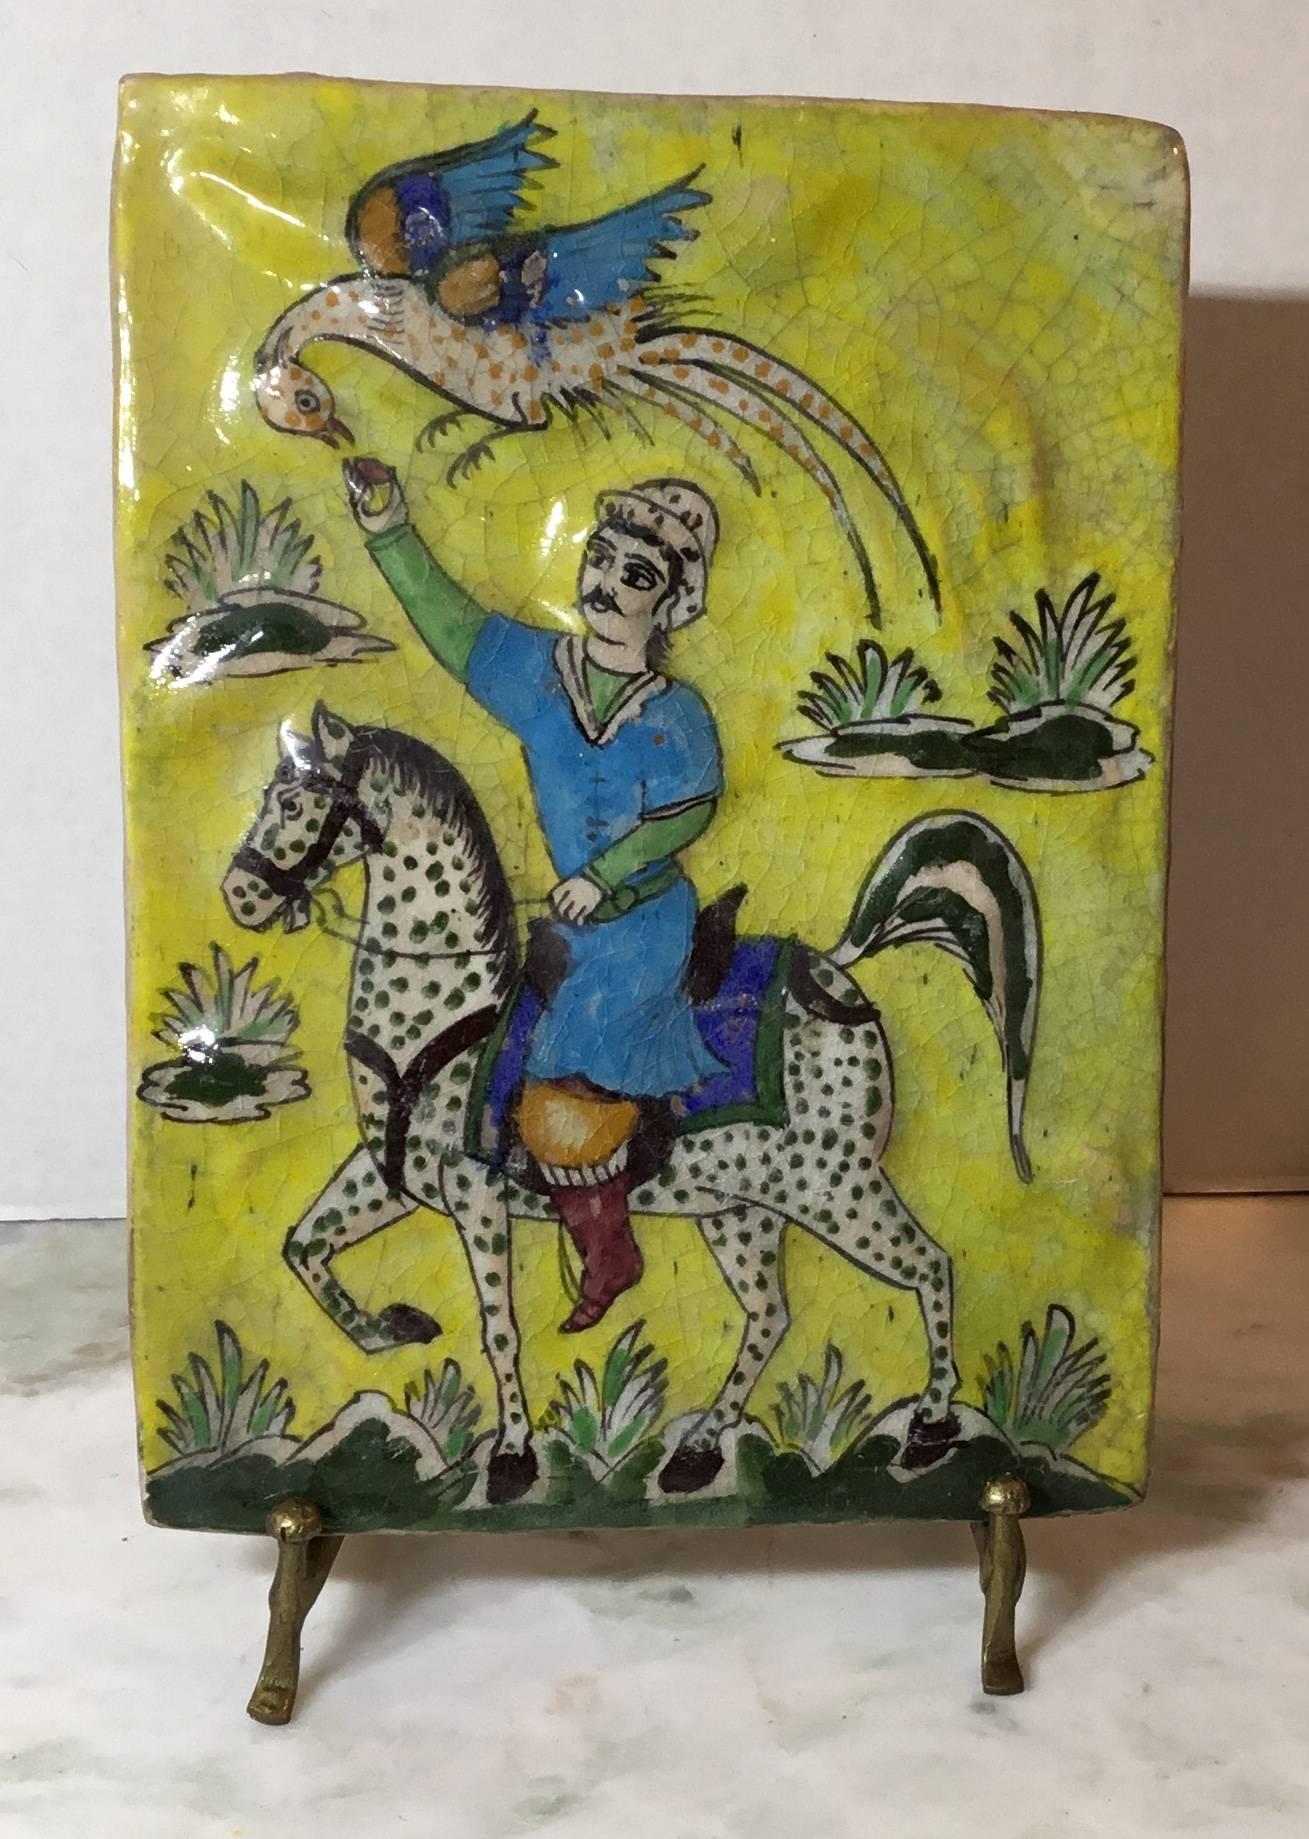 Exceptional tile made of ceramic hand-painted and glazed of man riding on a beautiful horse feeding a bird that look like the Phoenix
Bird from the Greek mythology. Great yellow color background.
You can hang this tile on the wall or display it on